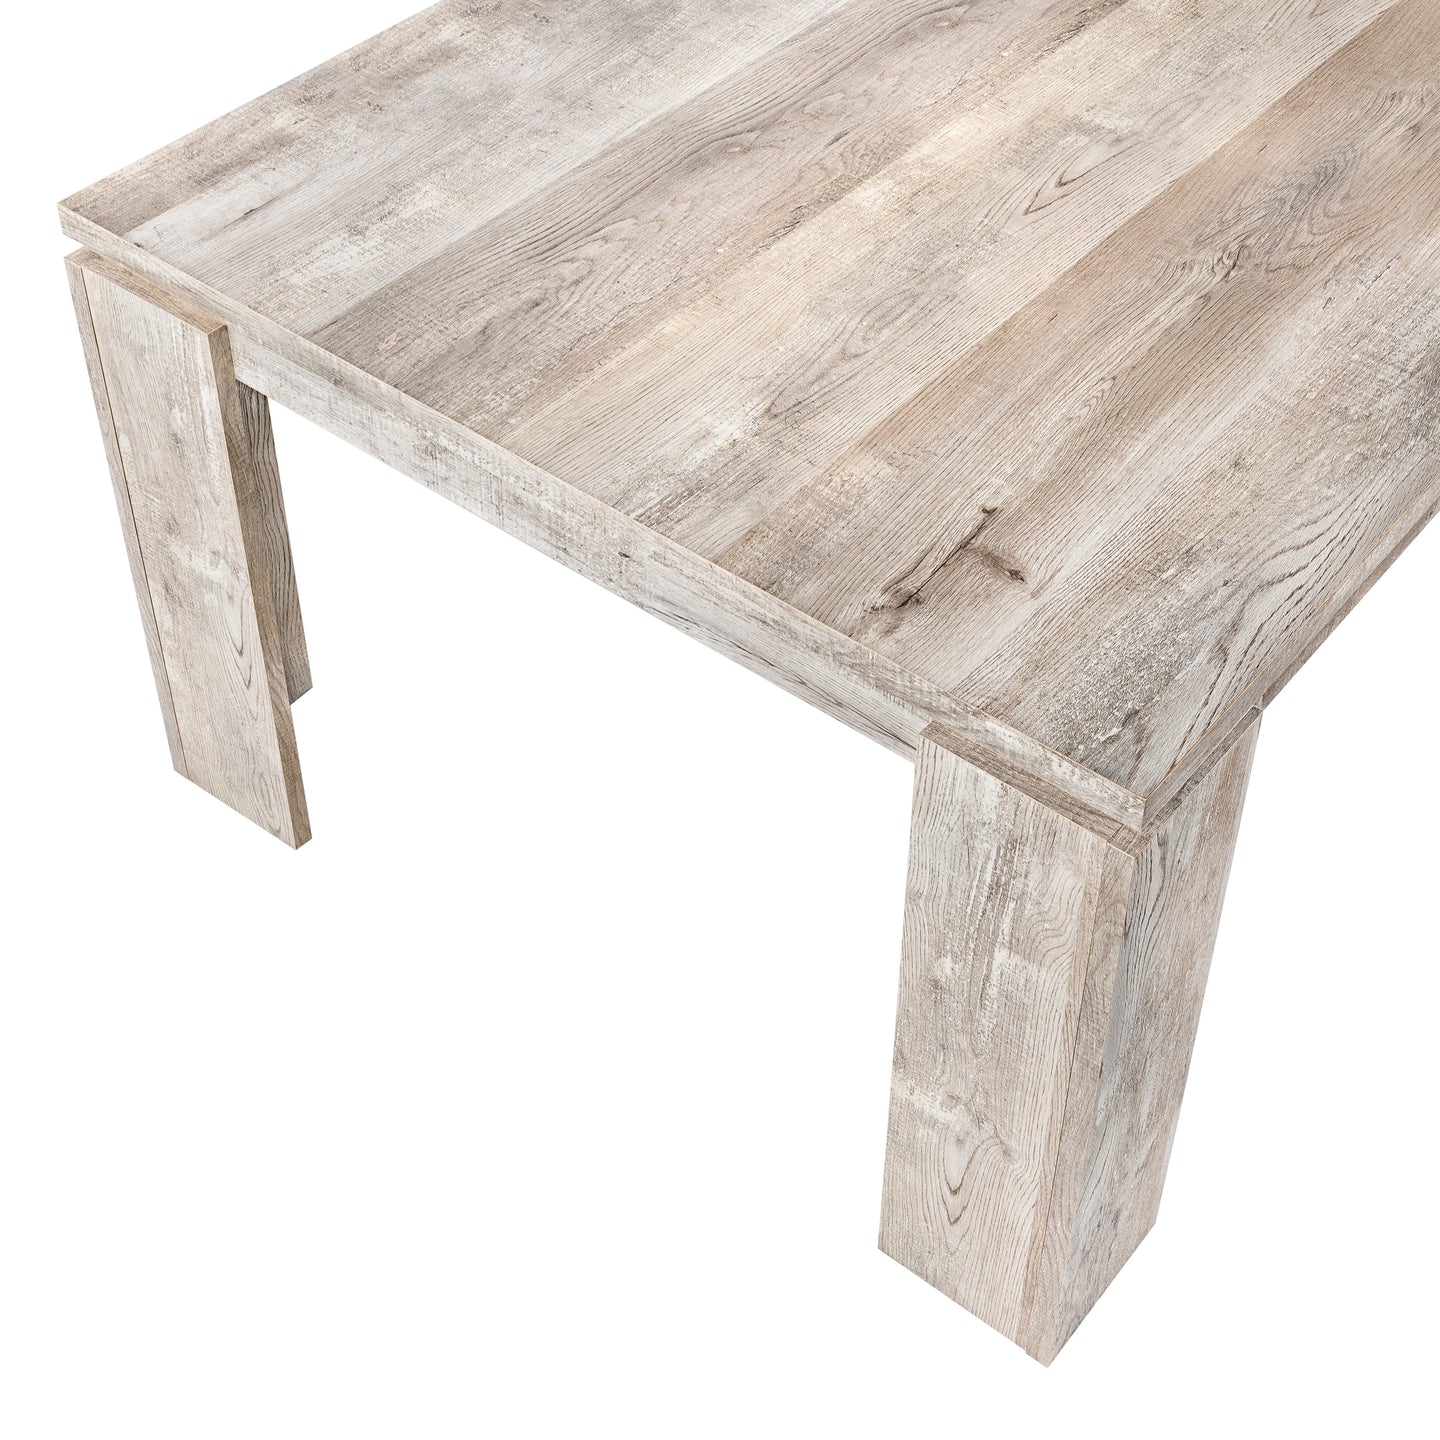 I 1088 Dining Table - 36"X 60" / Taupe Reclaimed Wood-Look - Furniture Depot (7881065103608)